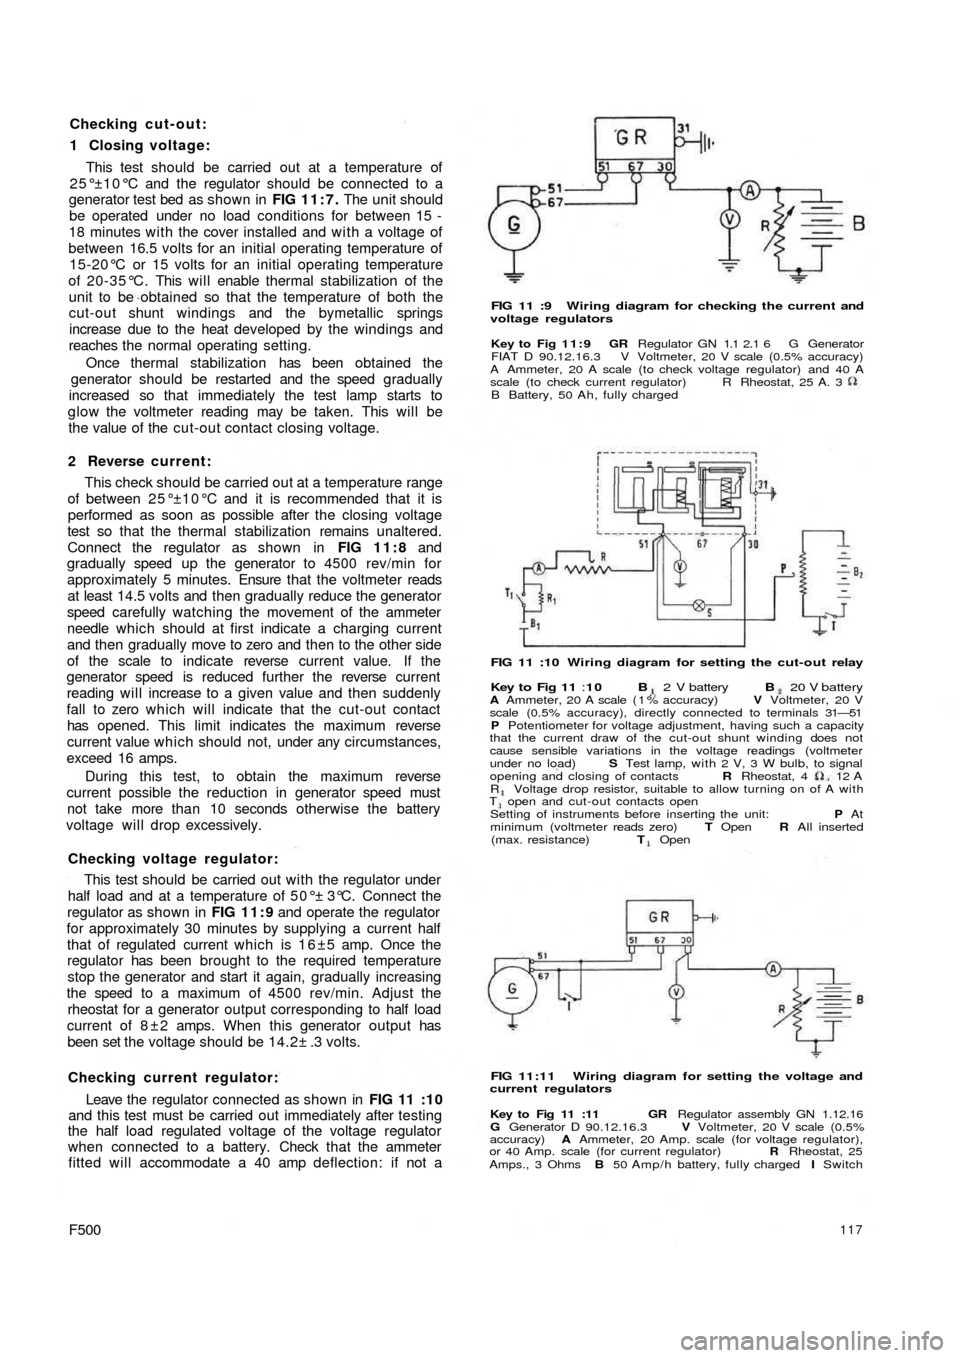 FIAT 500 1966 1.G Workshop Manual Checking cut-out:
1 Closing voltage:
This test should be carried out at a temperature of
25°±10°C and the regulator should be connected to a
generator test bed as shown in FIG 11:7. The unit should